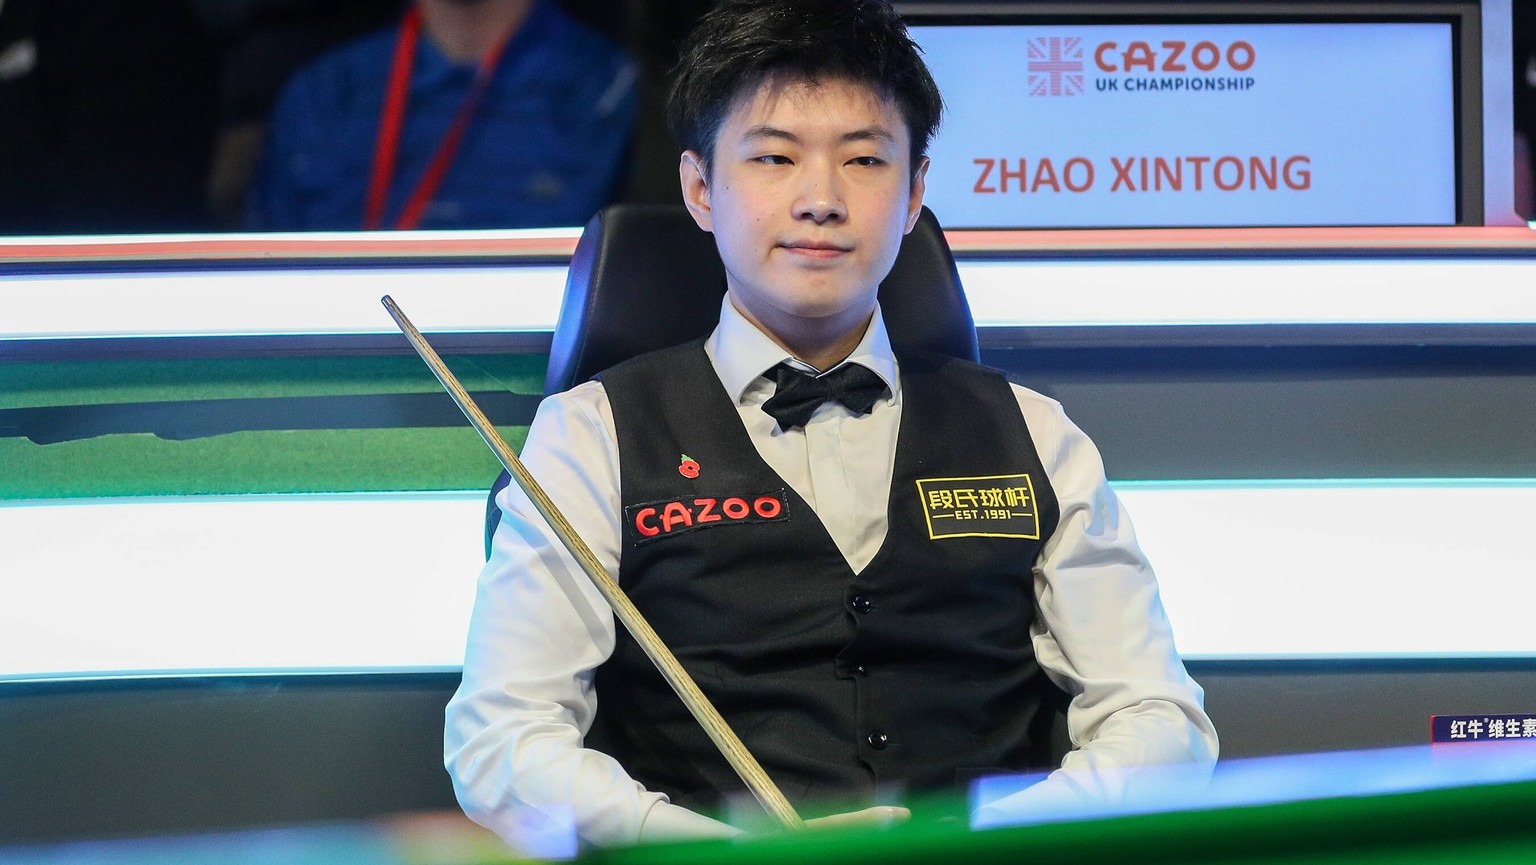 Snooker Cazoo UK Championship Zhao Xintong during their 1st round match against Sam Craigie at the Cazoo UK Championship 2022. Zhao Xintong vs Sam Craigie at York Barbican, York, United Kingdom on 12  ...